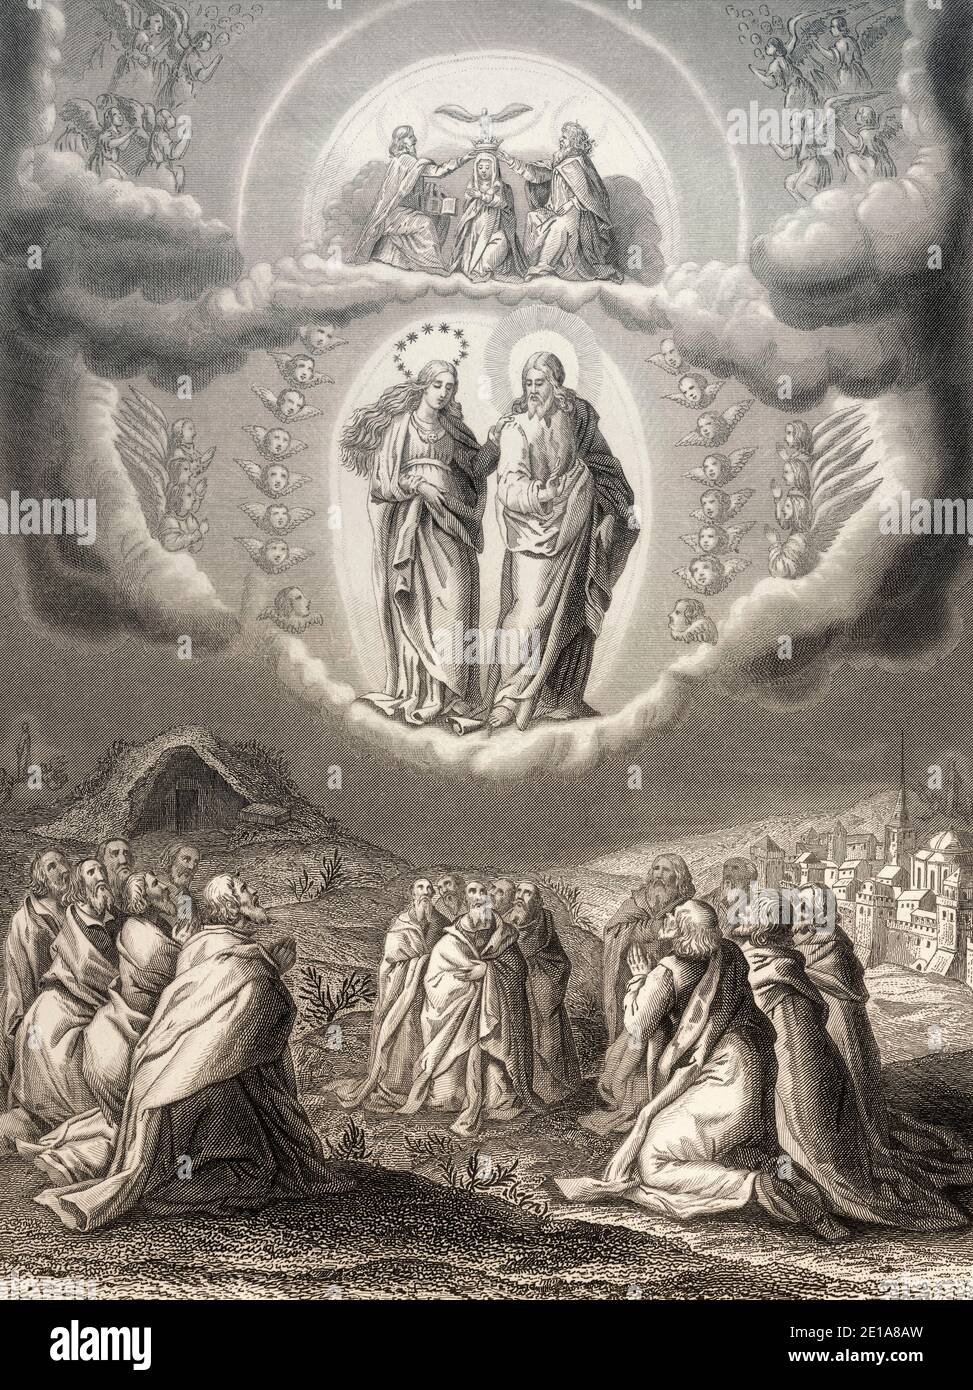 The Assumption of Mary into Heaven, Steel engraving 1853, digitally restored Stock Photo